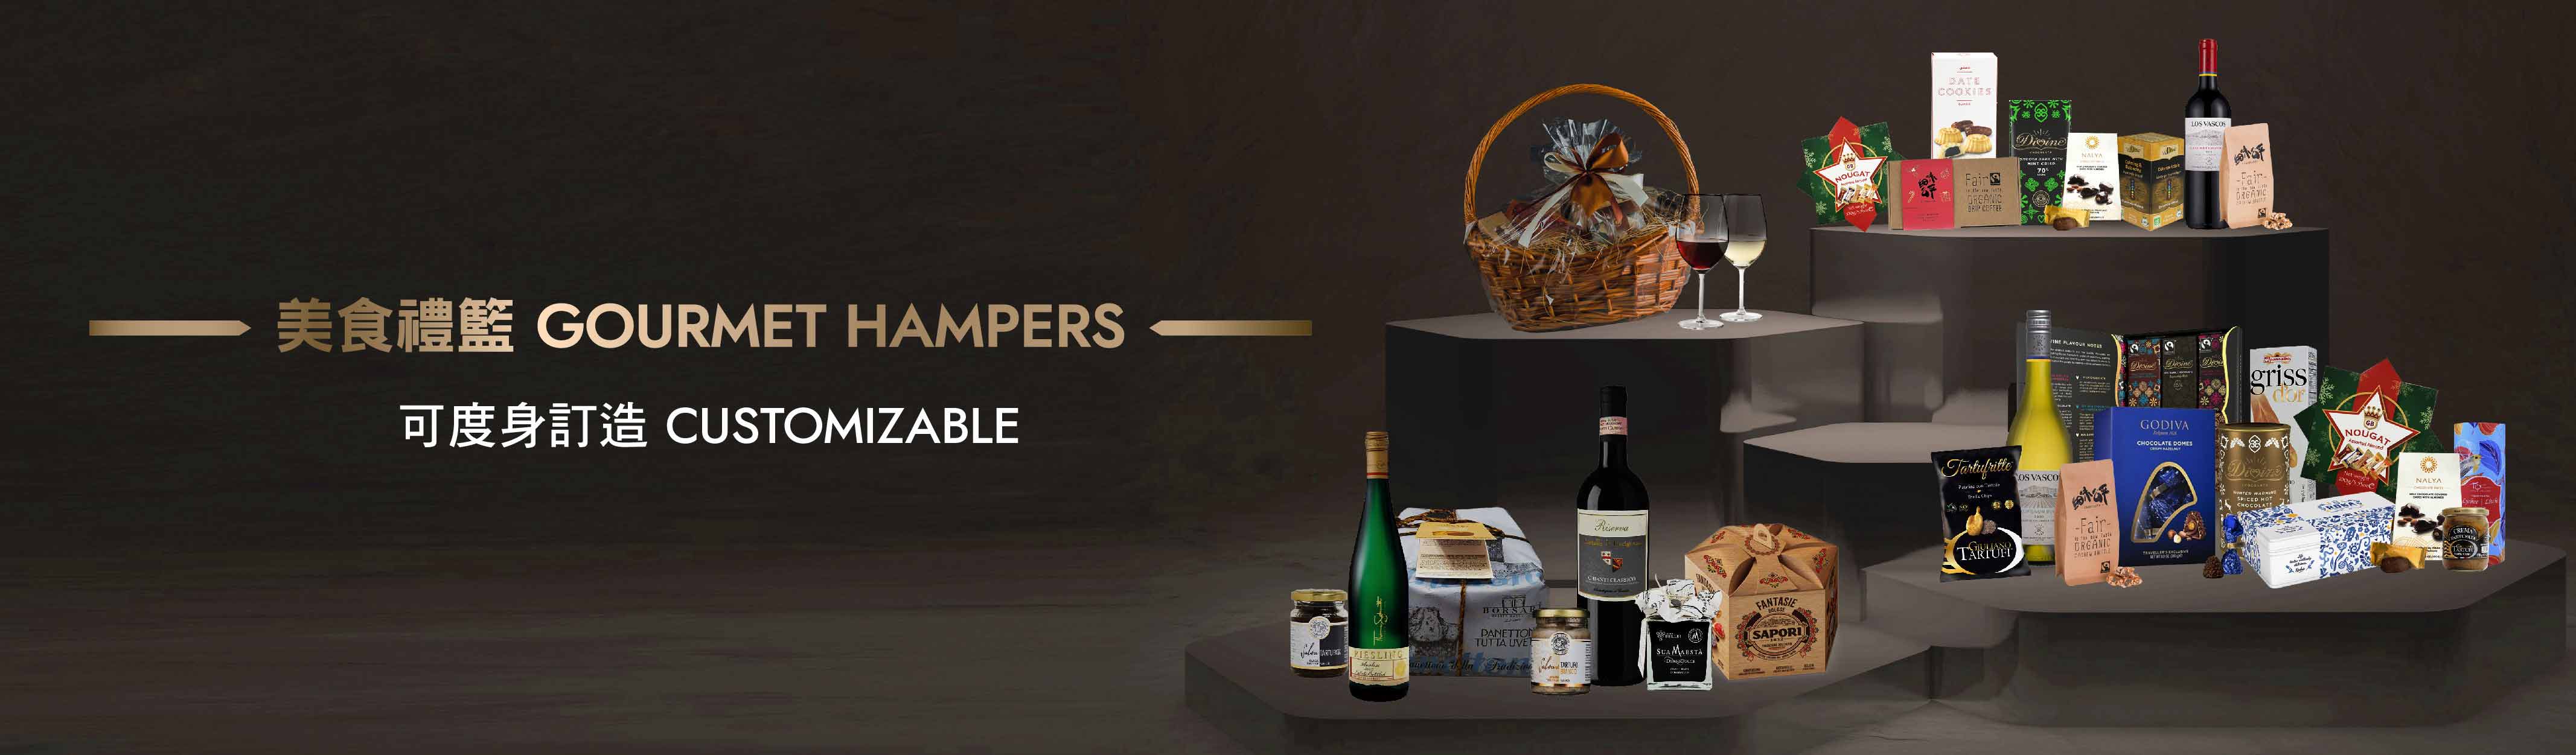 Gourmet Hampers - Customizable according to your budgets 美食禮籃 可跟據公司人數, Budget度身訂造